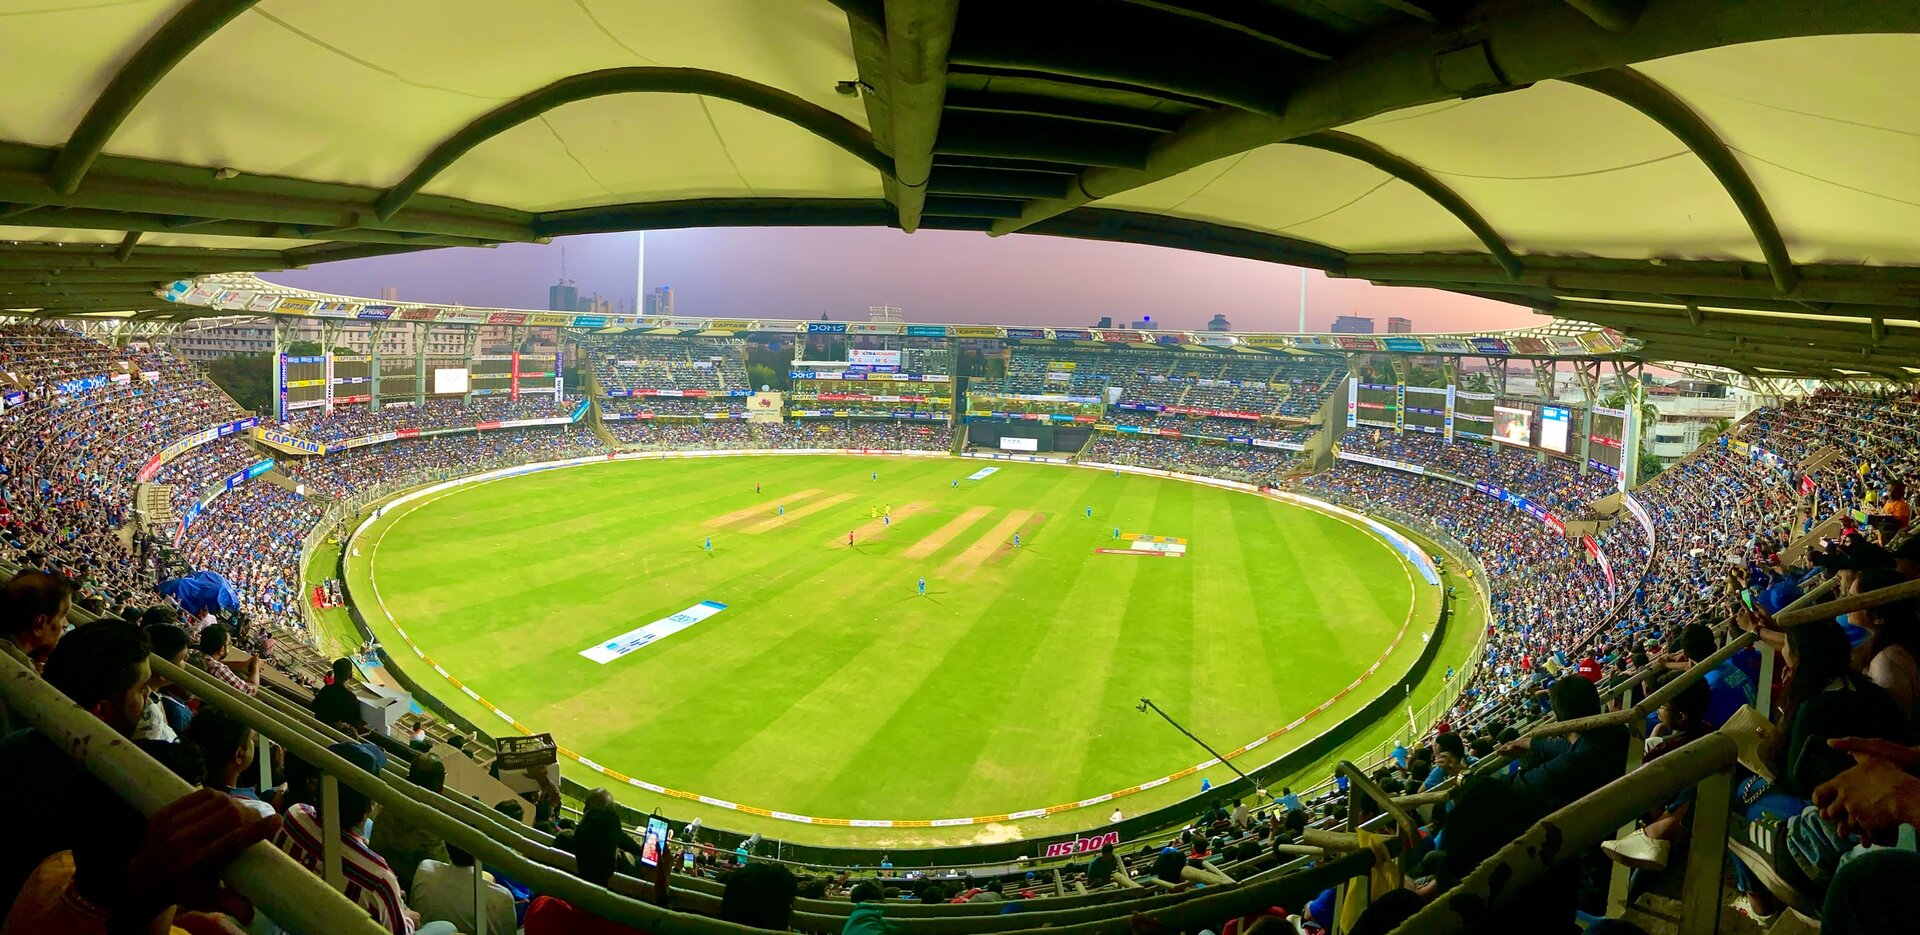 6 Cities to Visit for IPL 2021